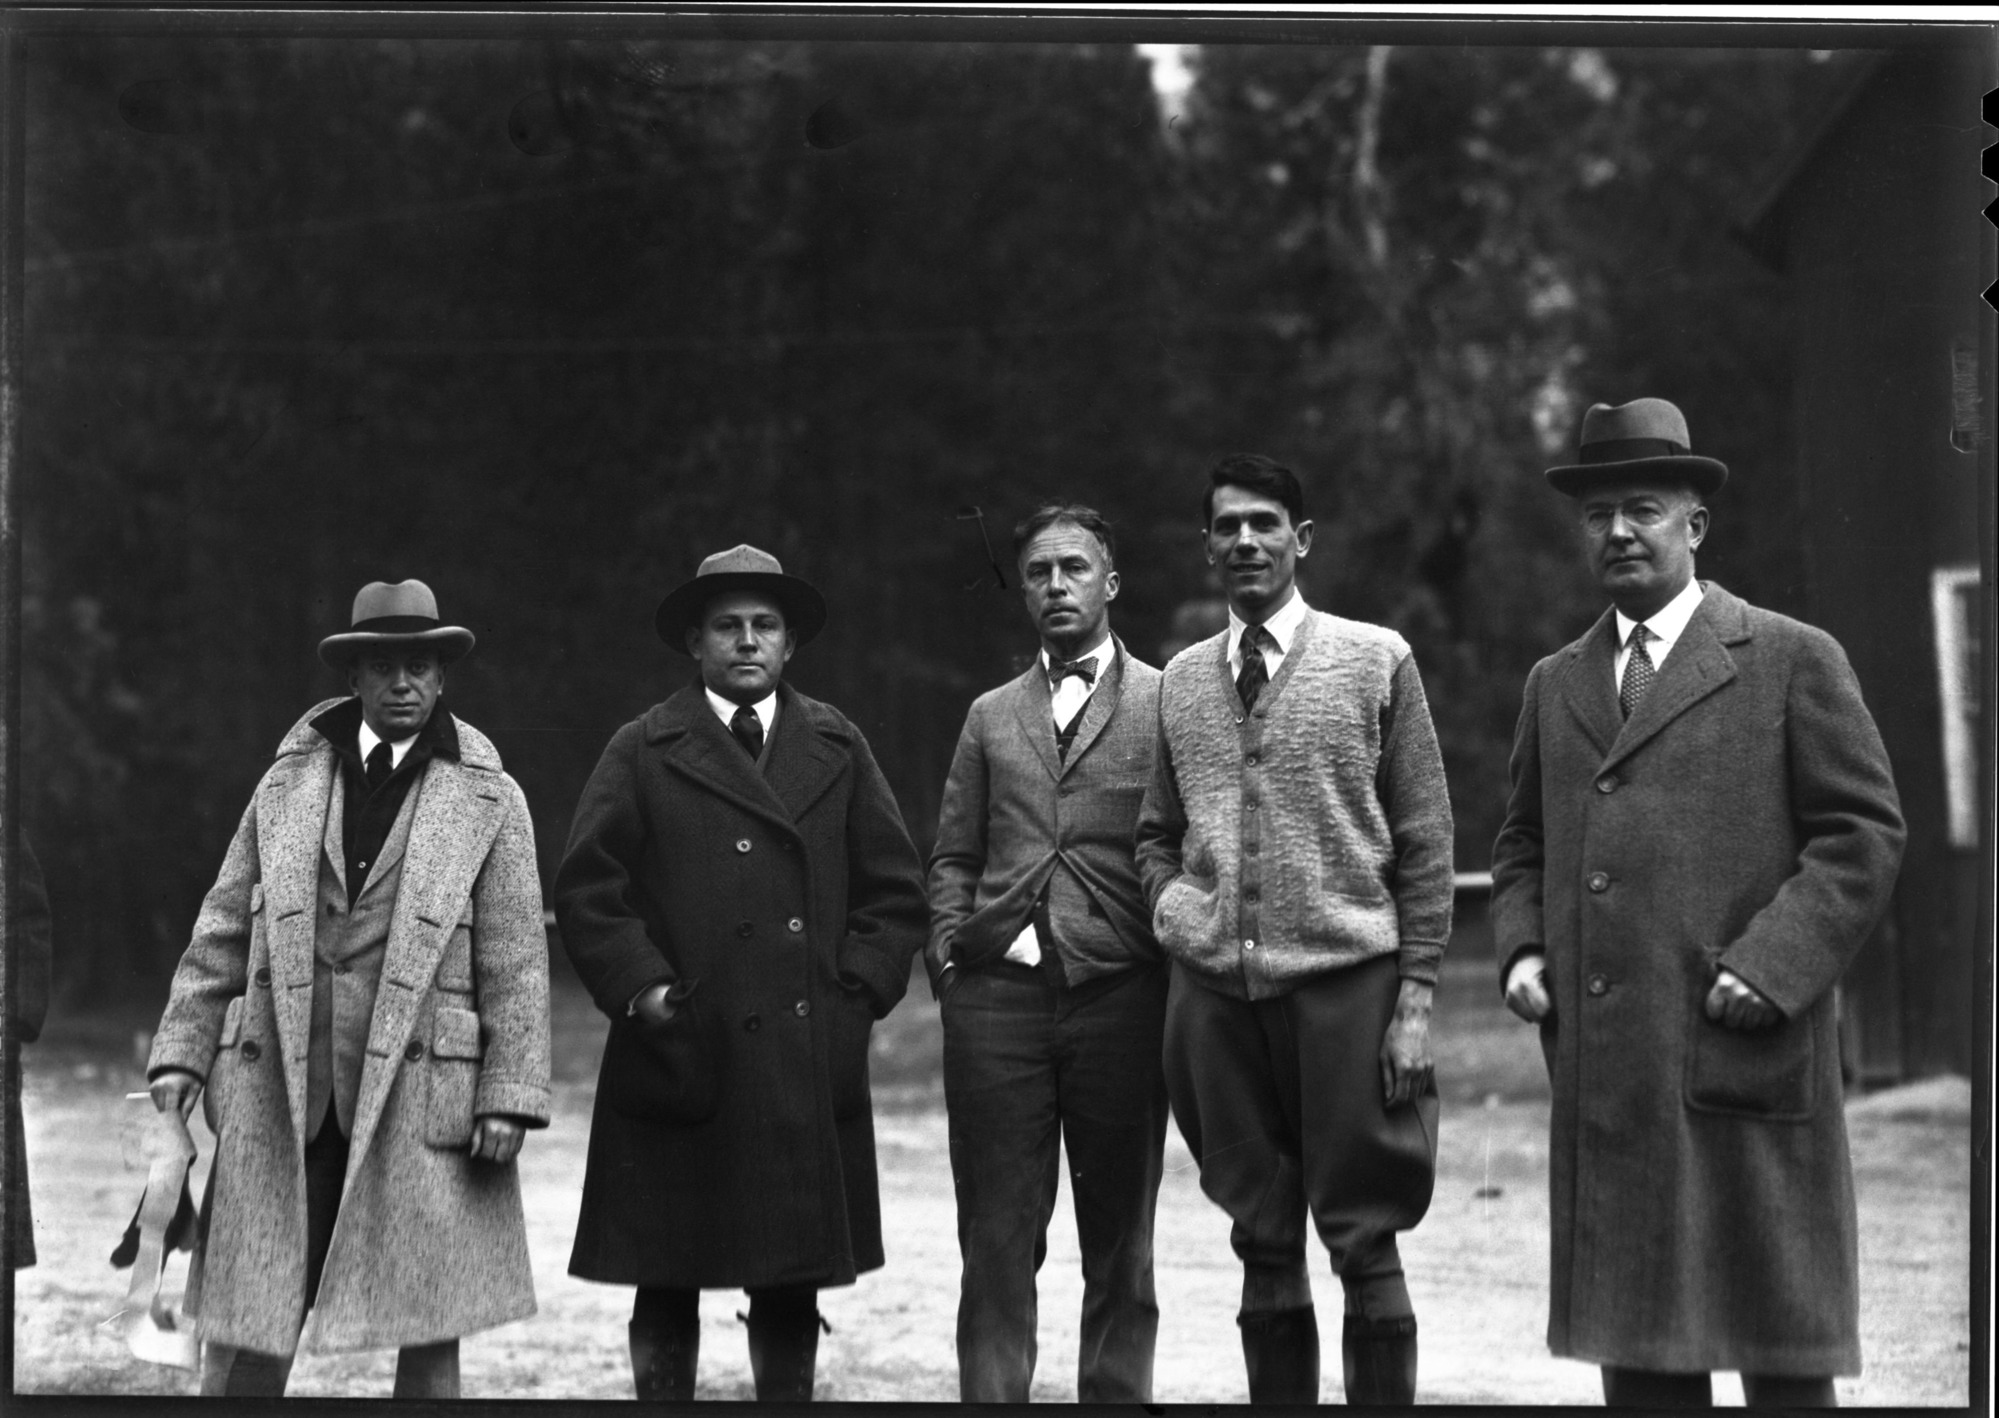 Looking over grounds for Ahwahnee Hotel. L-R: G.S. Underwood (Architect), Dan Hull (NPS Landscape Engineer), Mr. Lansdale (YP&CC Director), Dr. Tresidder (Pres. YP&CC) and Mr. John Drum (Director)